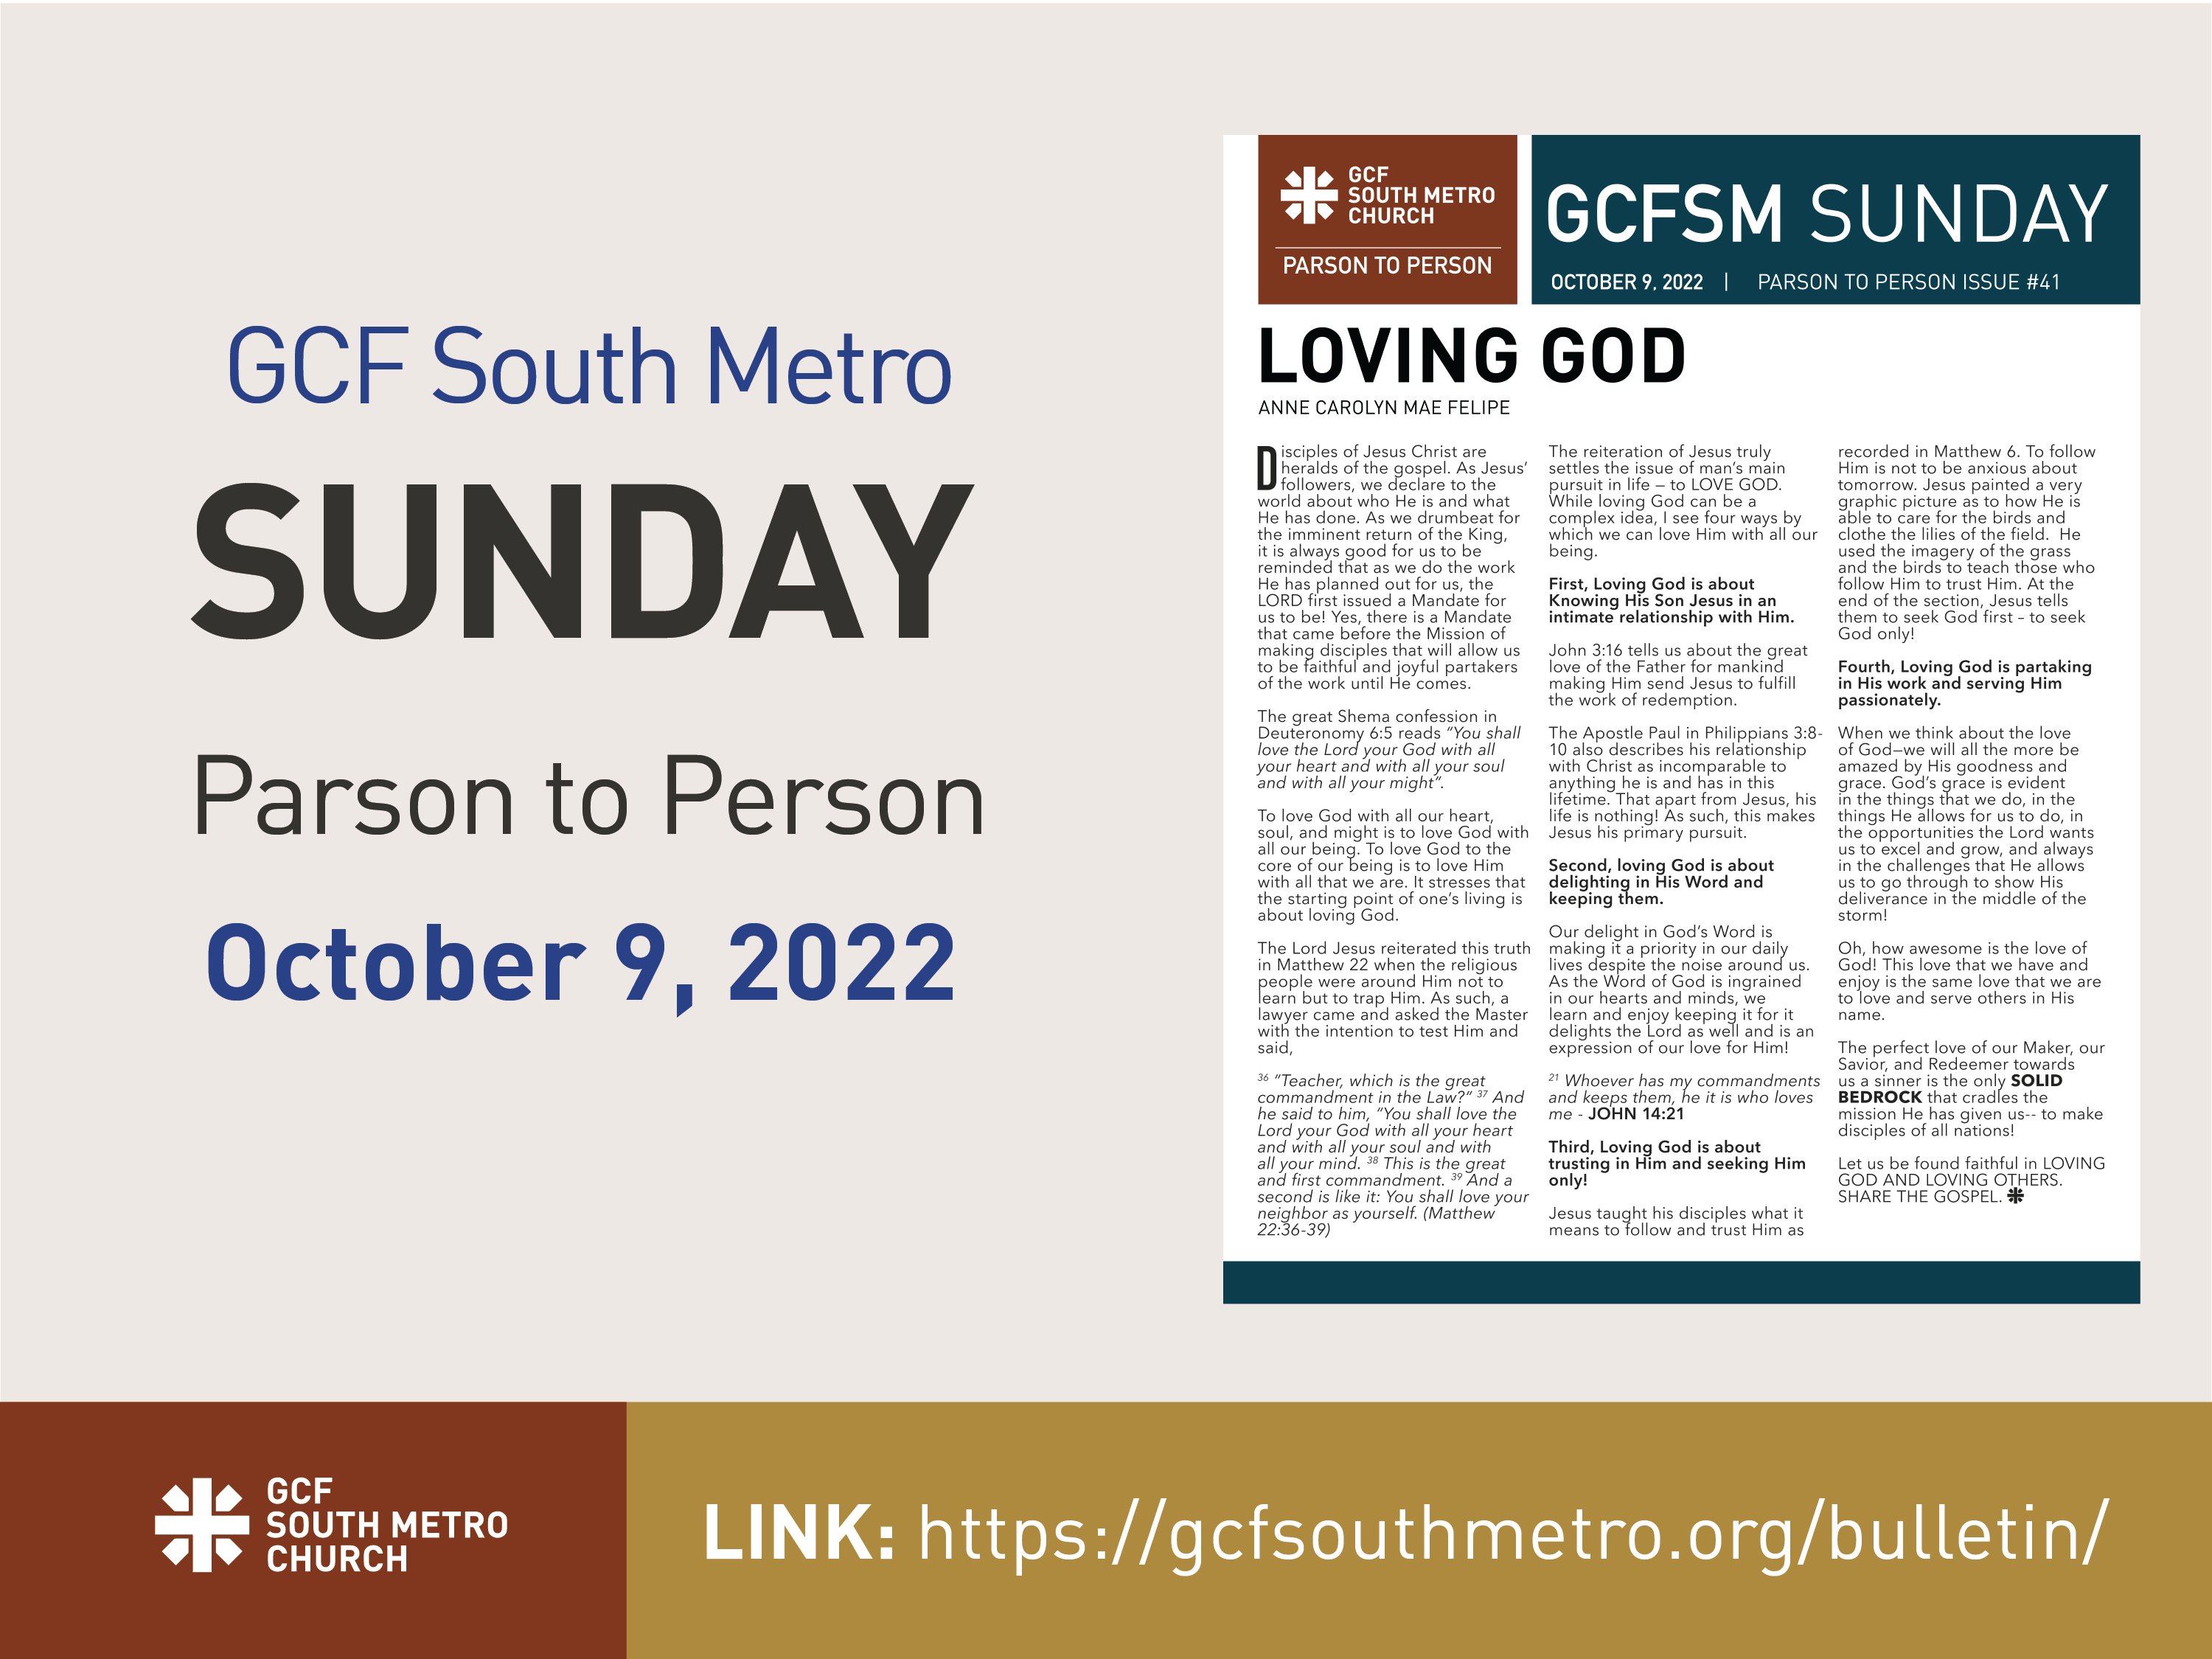 Sunday Bulletin – Parson to Person, October 9, 2022